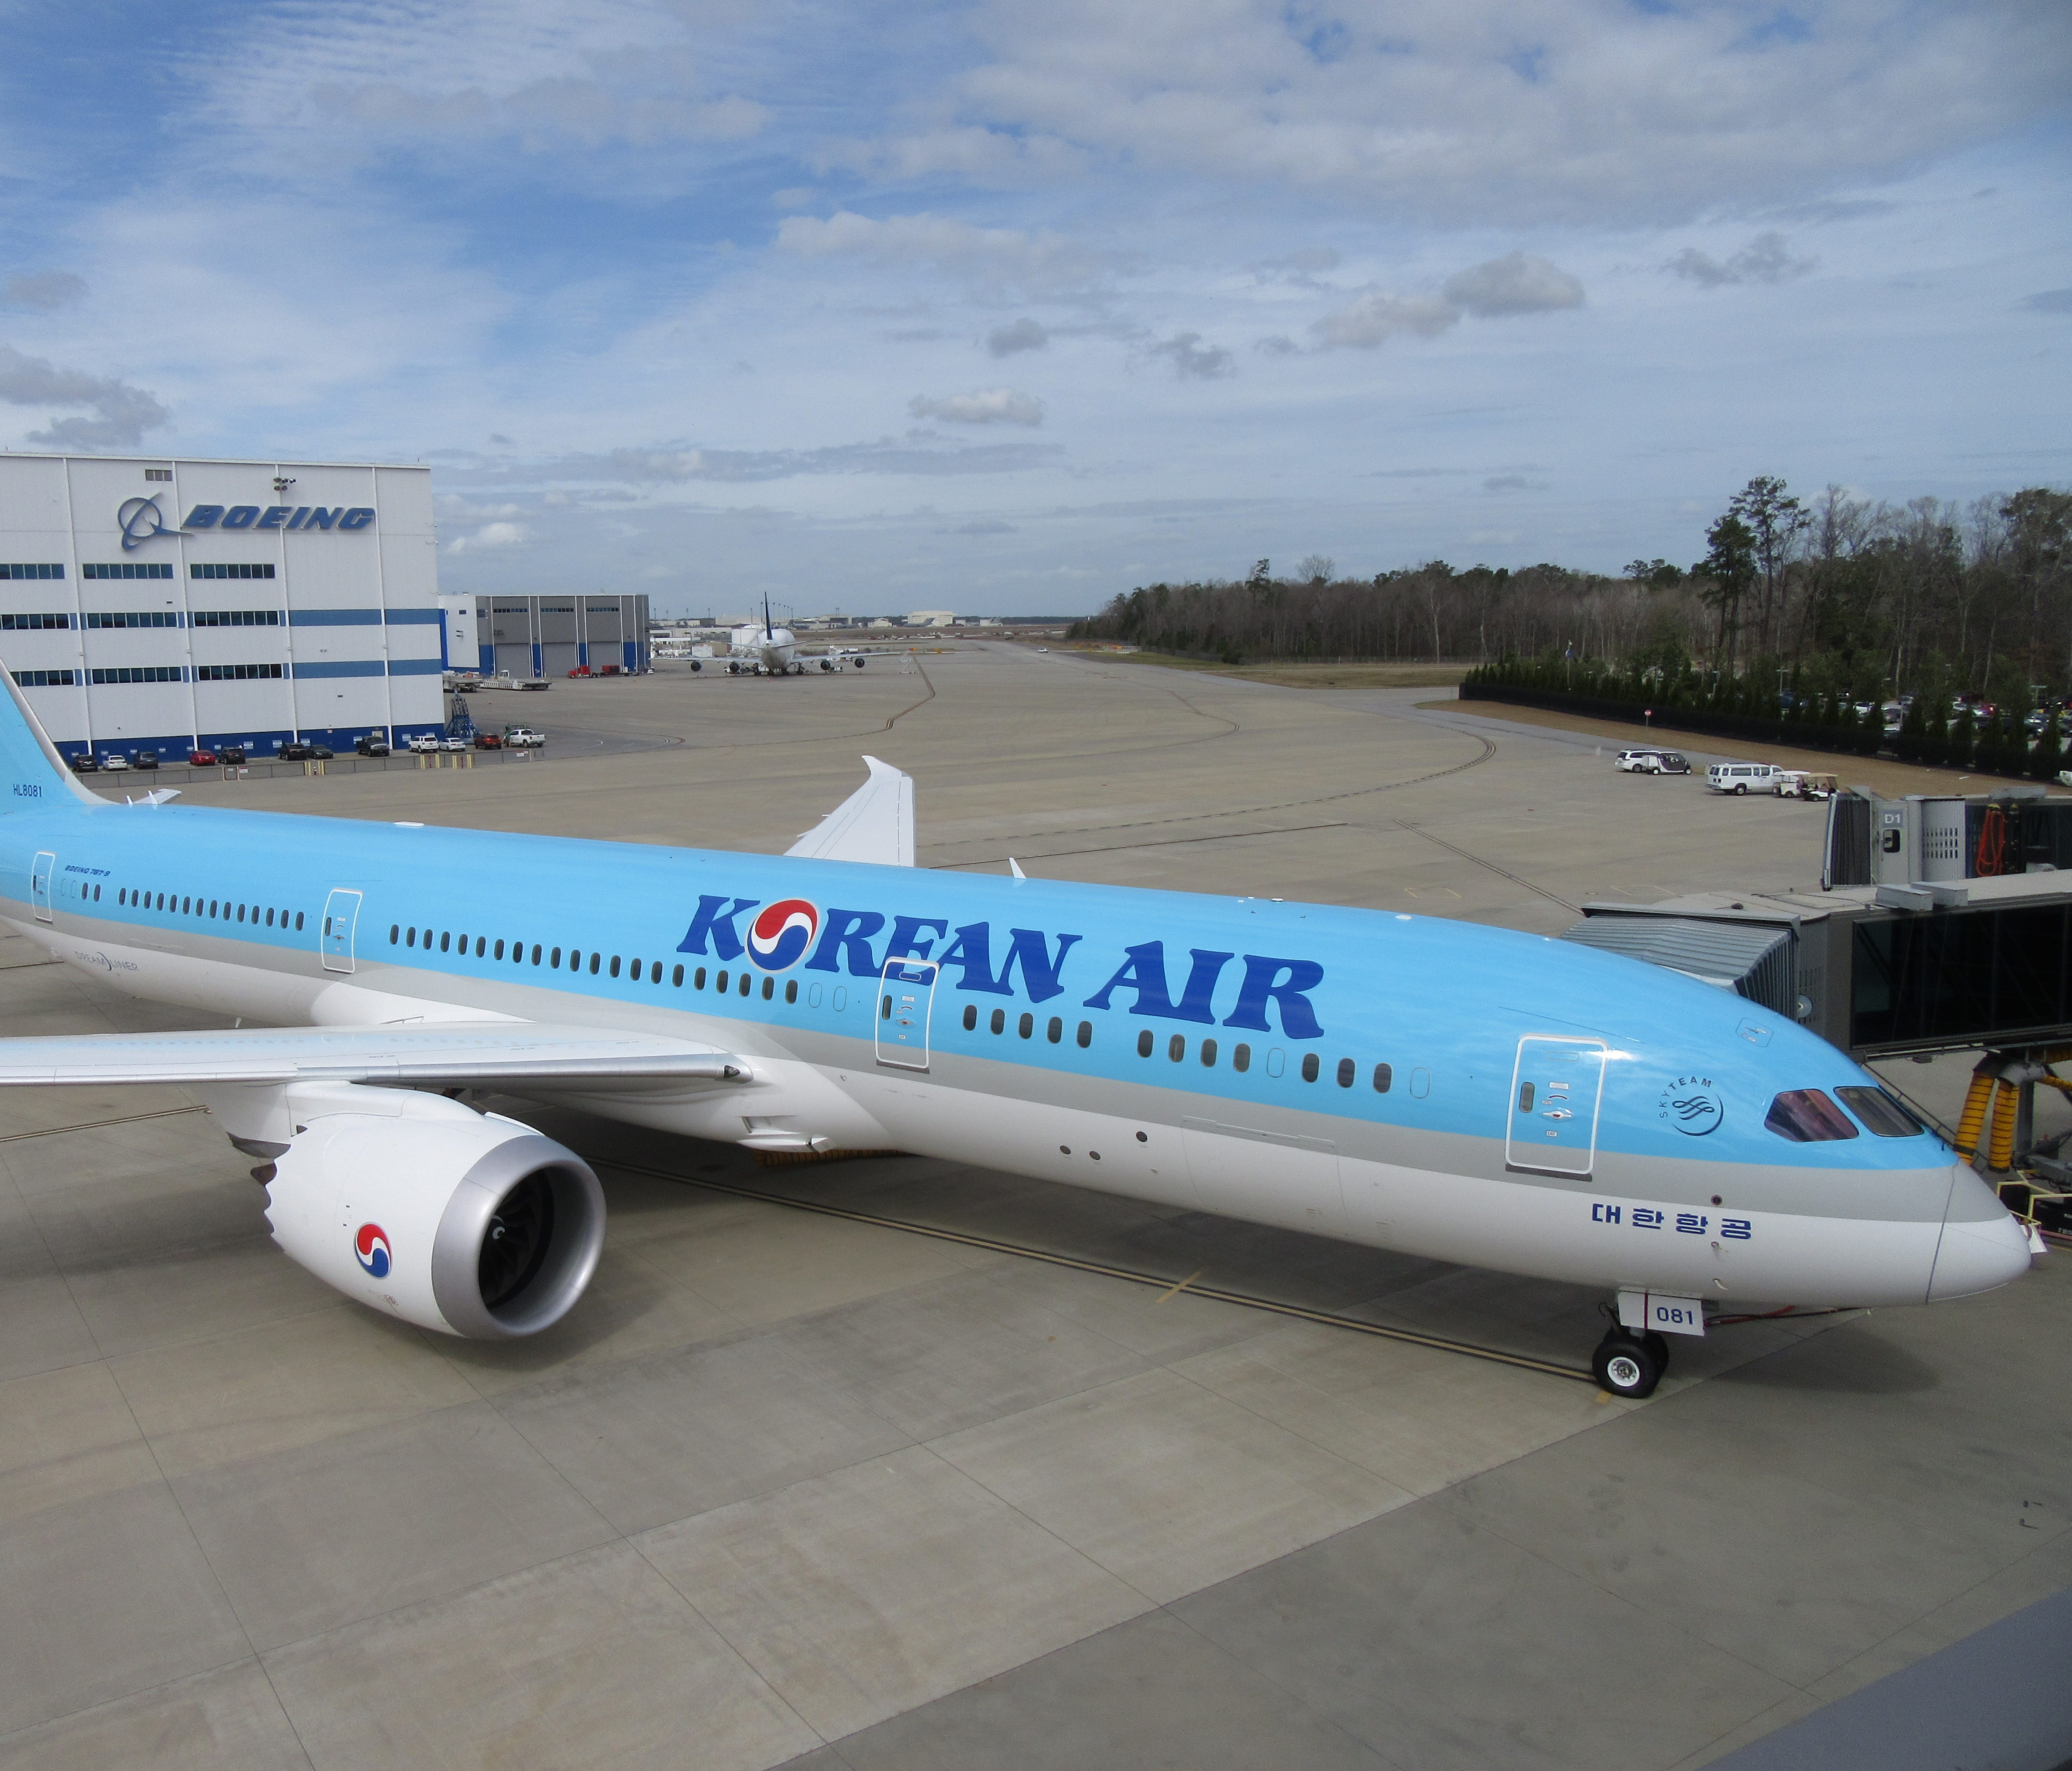 Korean Air's first Boeing 787-9 Dreamliner is seen during delivery ceremony festivities at Boeing's 787 facilities in North Charleston, S.C., on Feb. 22, 2017.